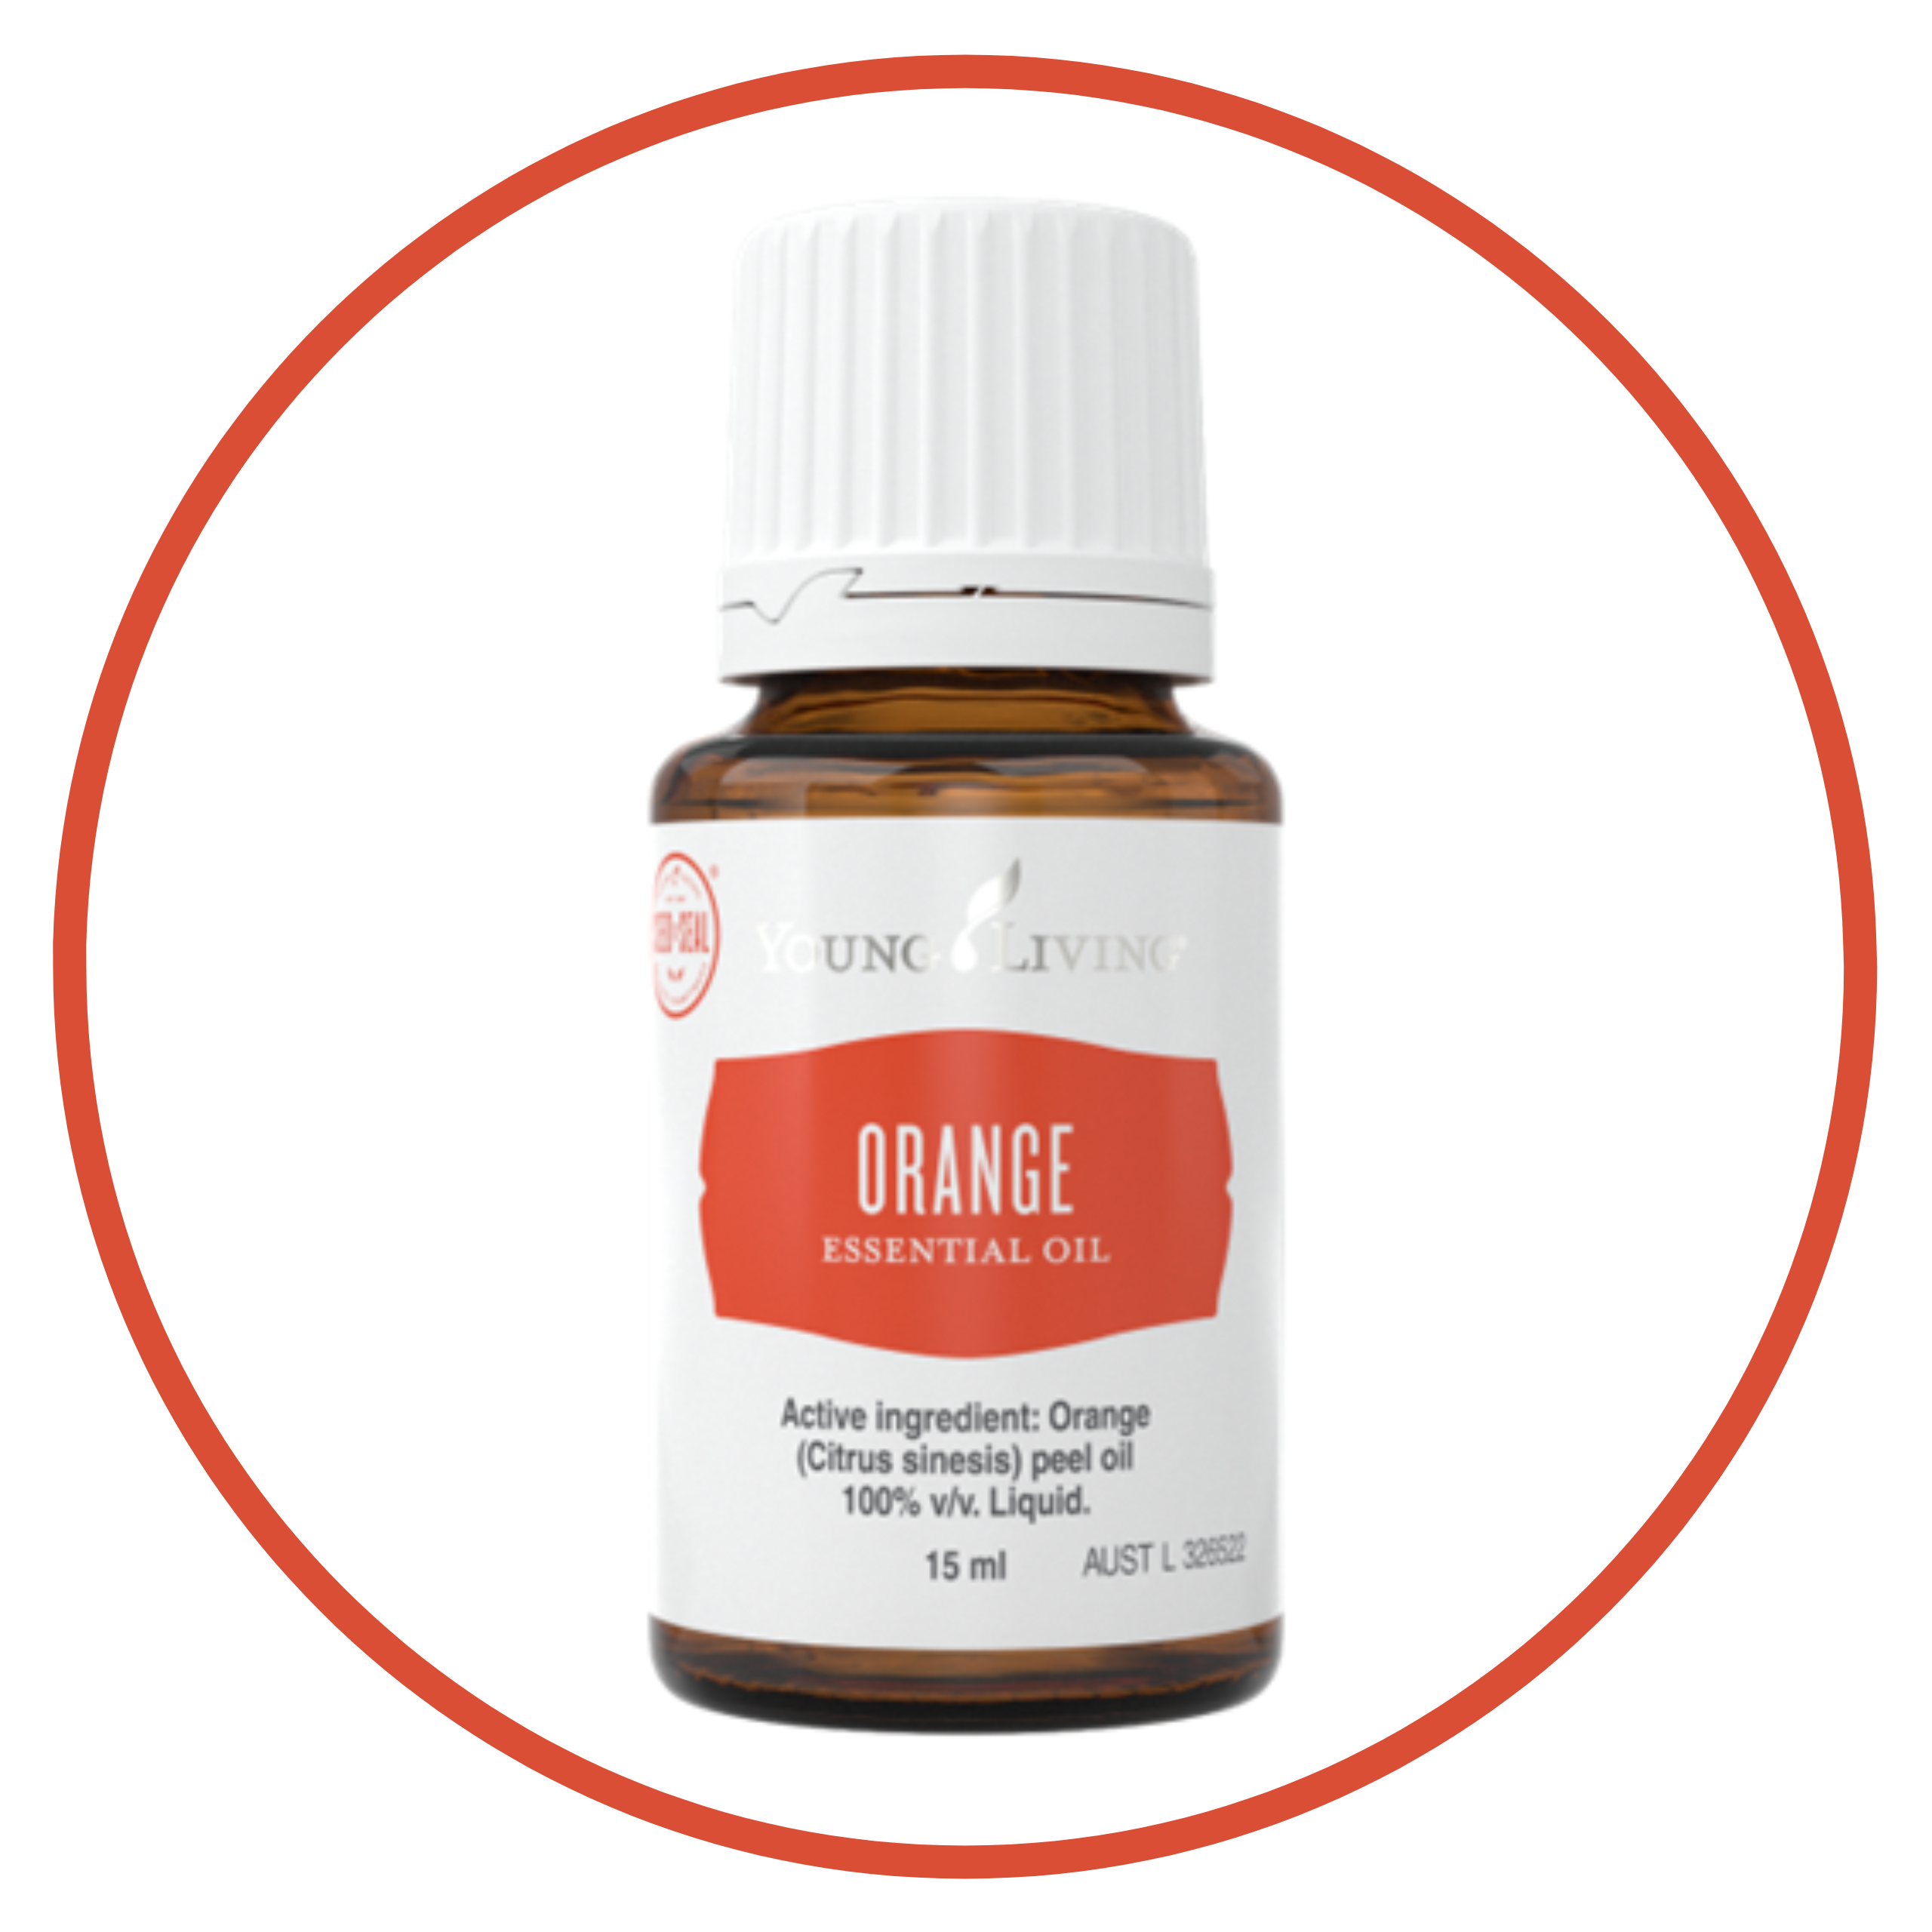 Image of Young Living 'orange' essential oil bottle